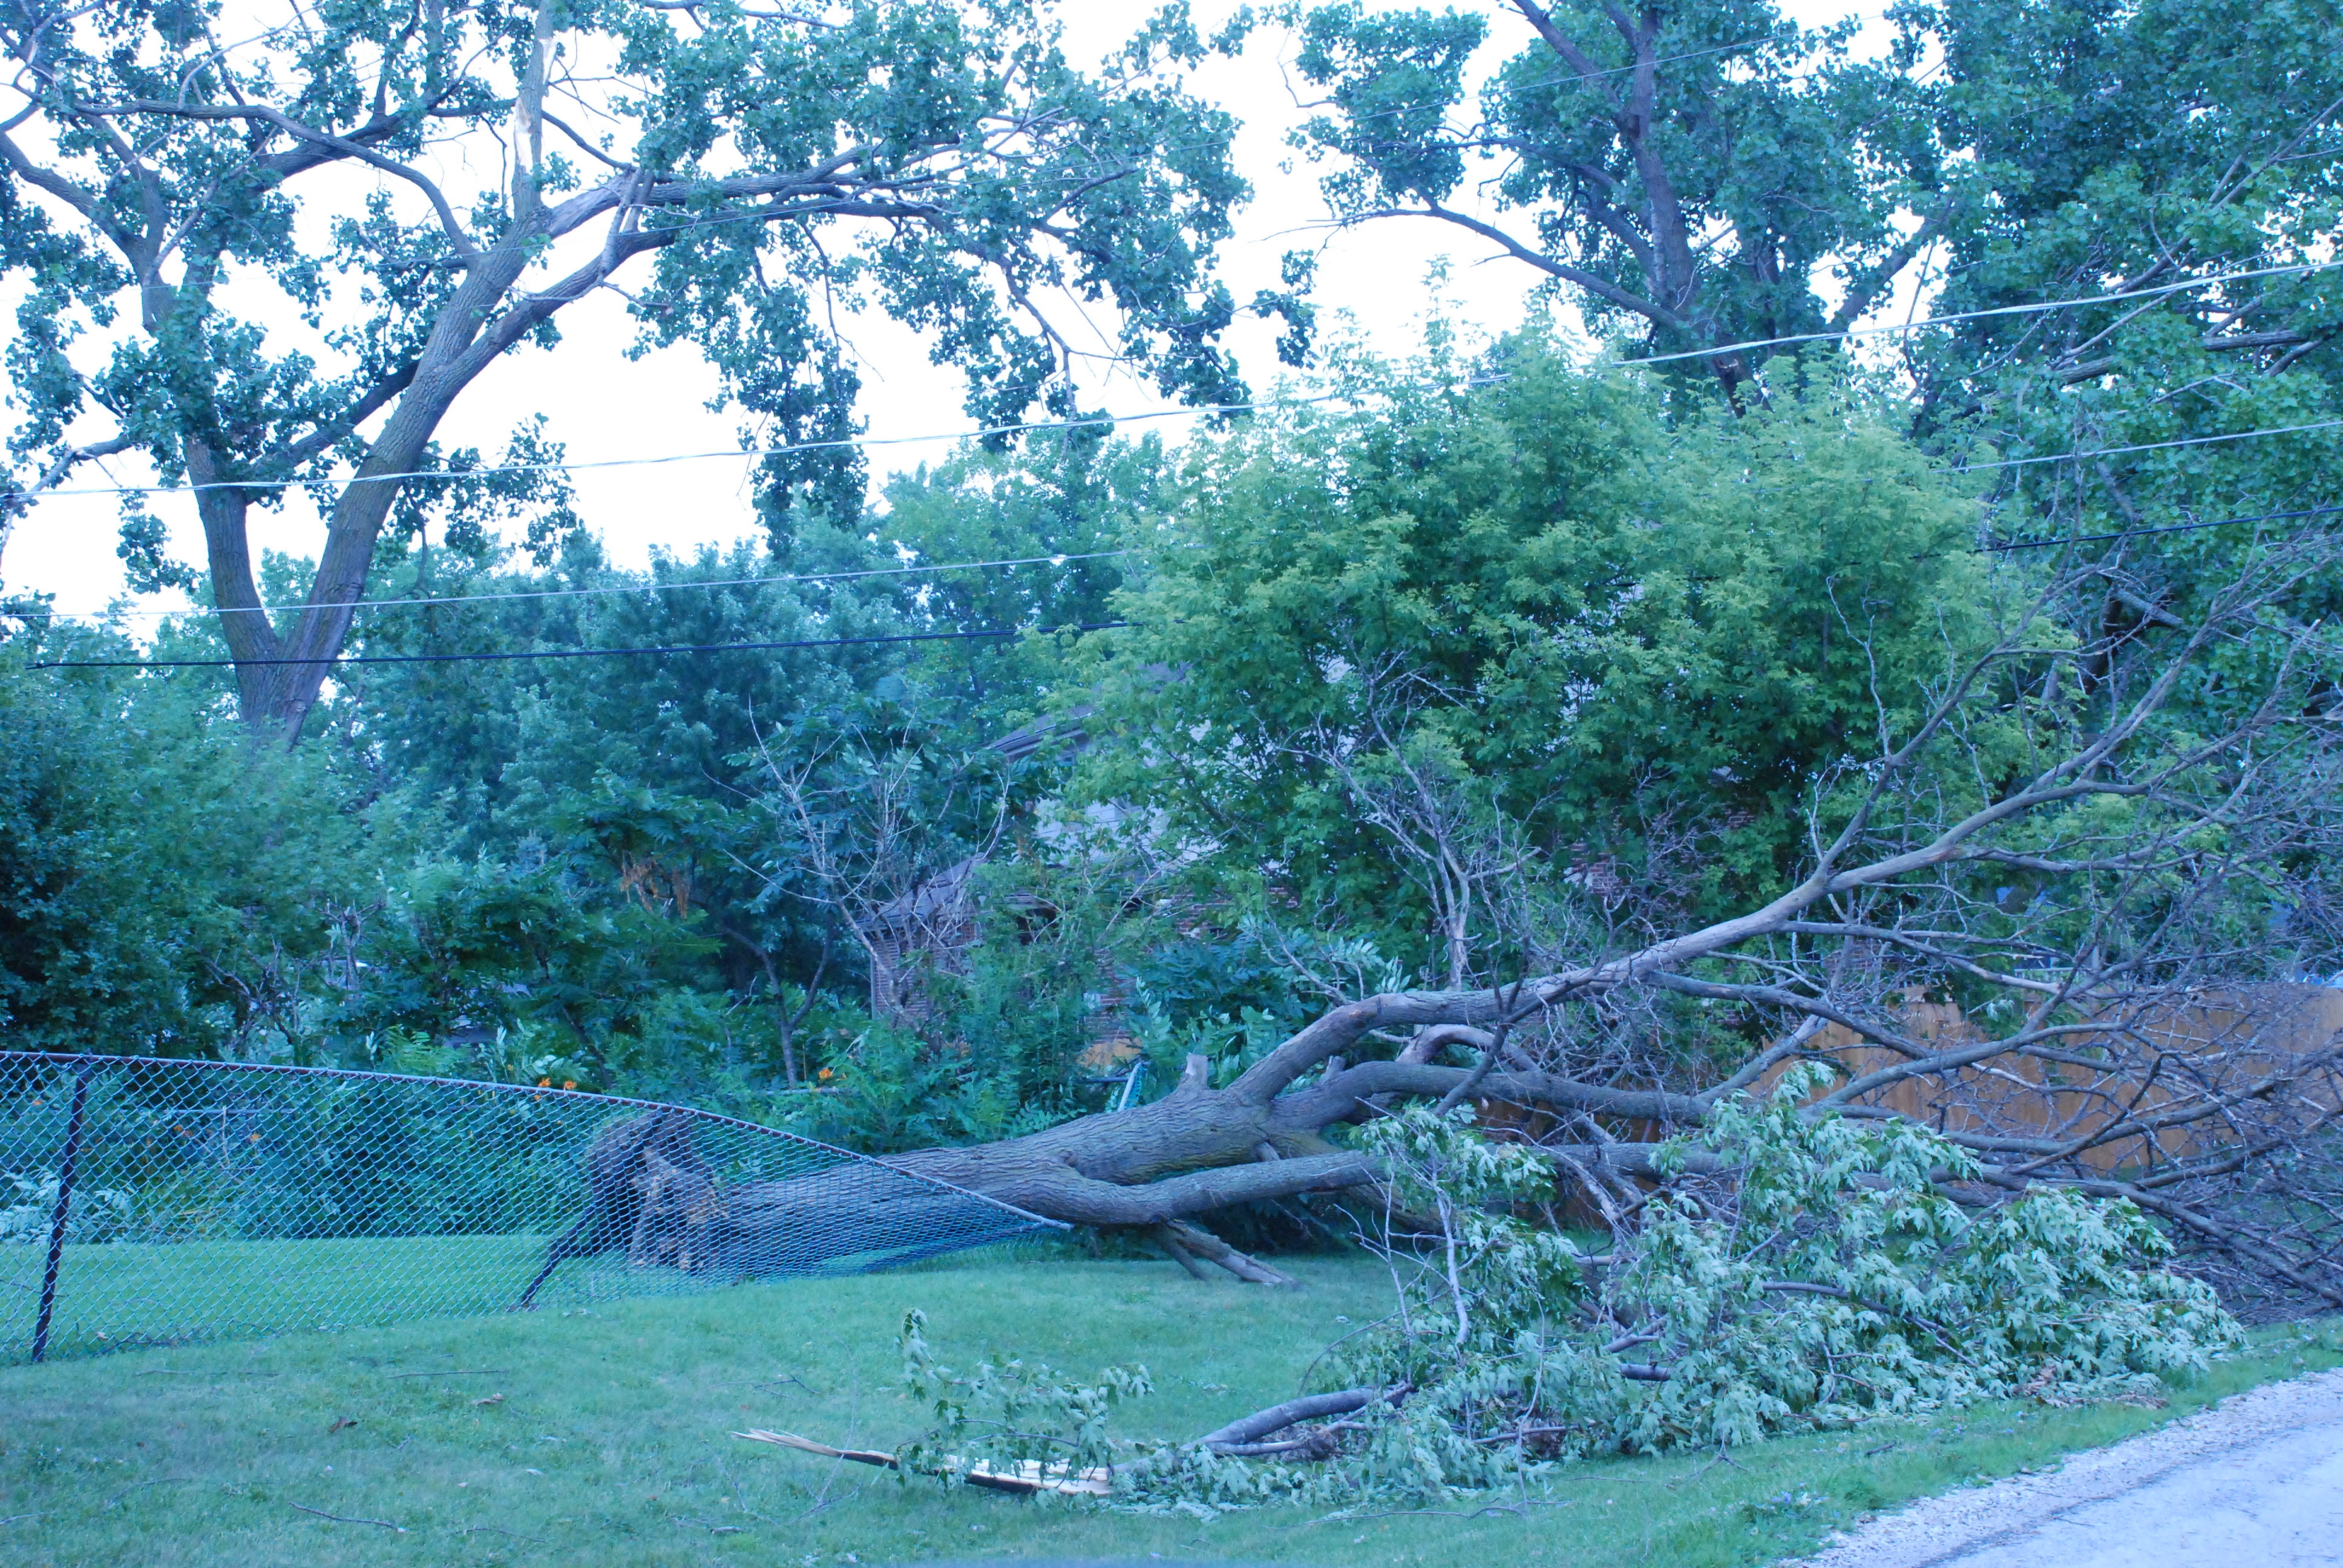 Photo showing damage from the Orland Park tornado